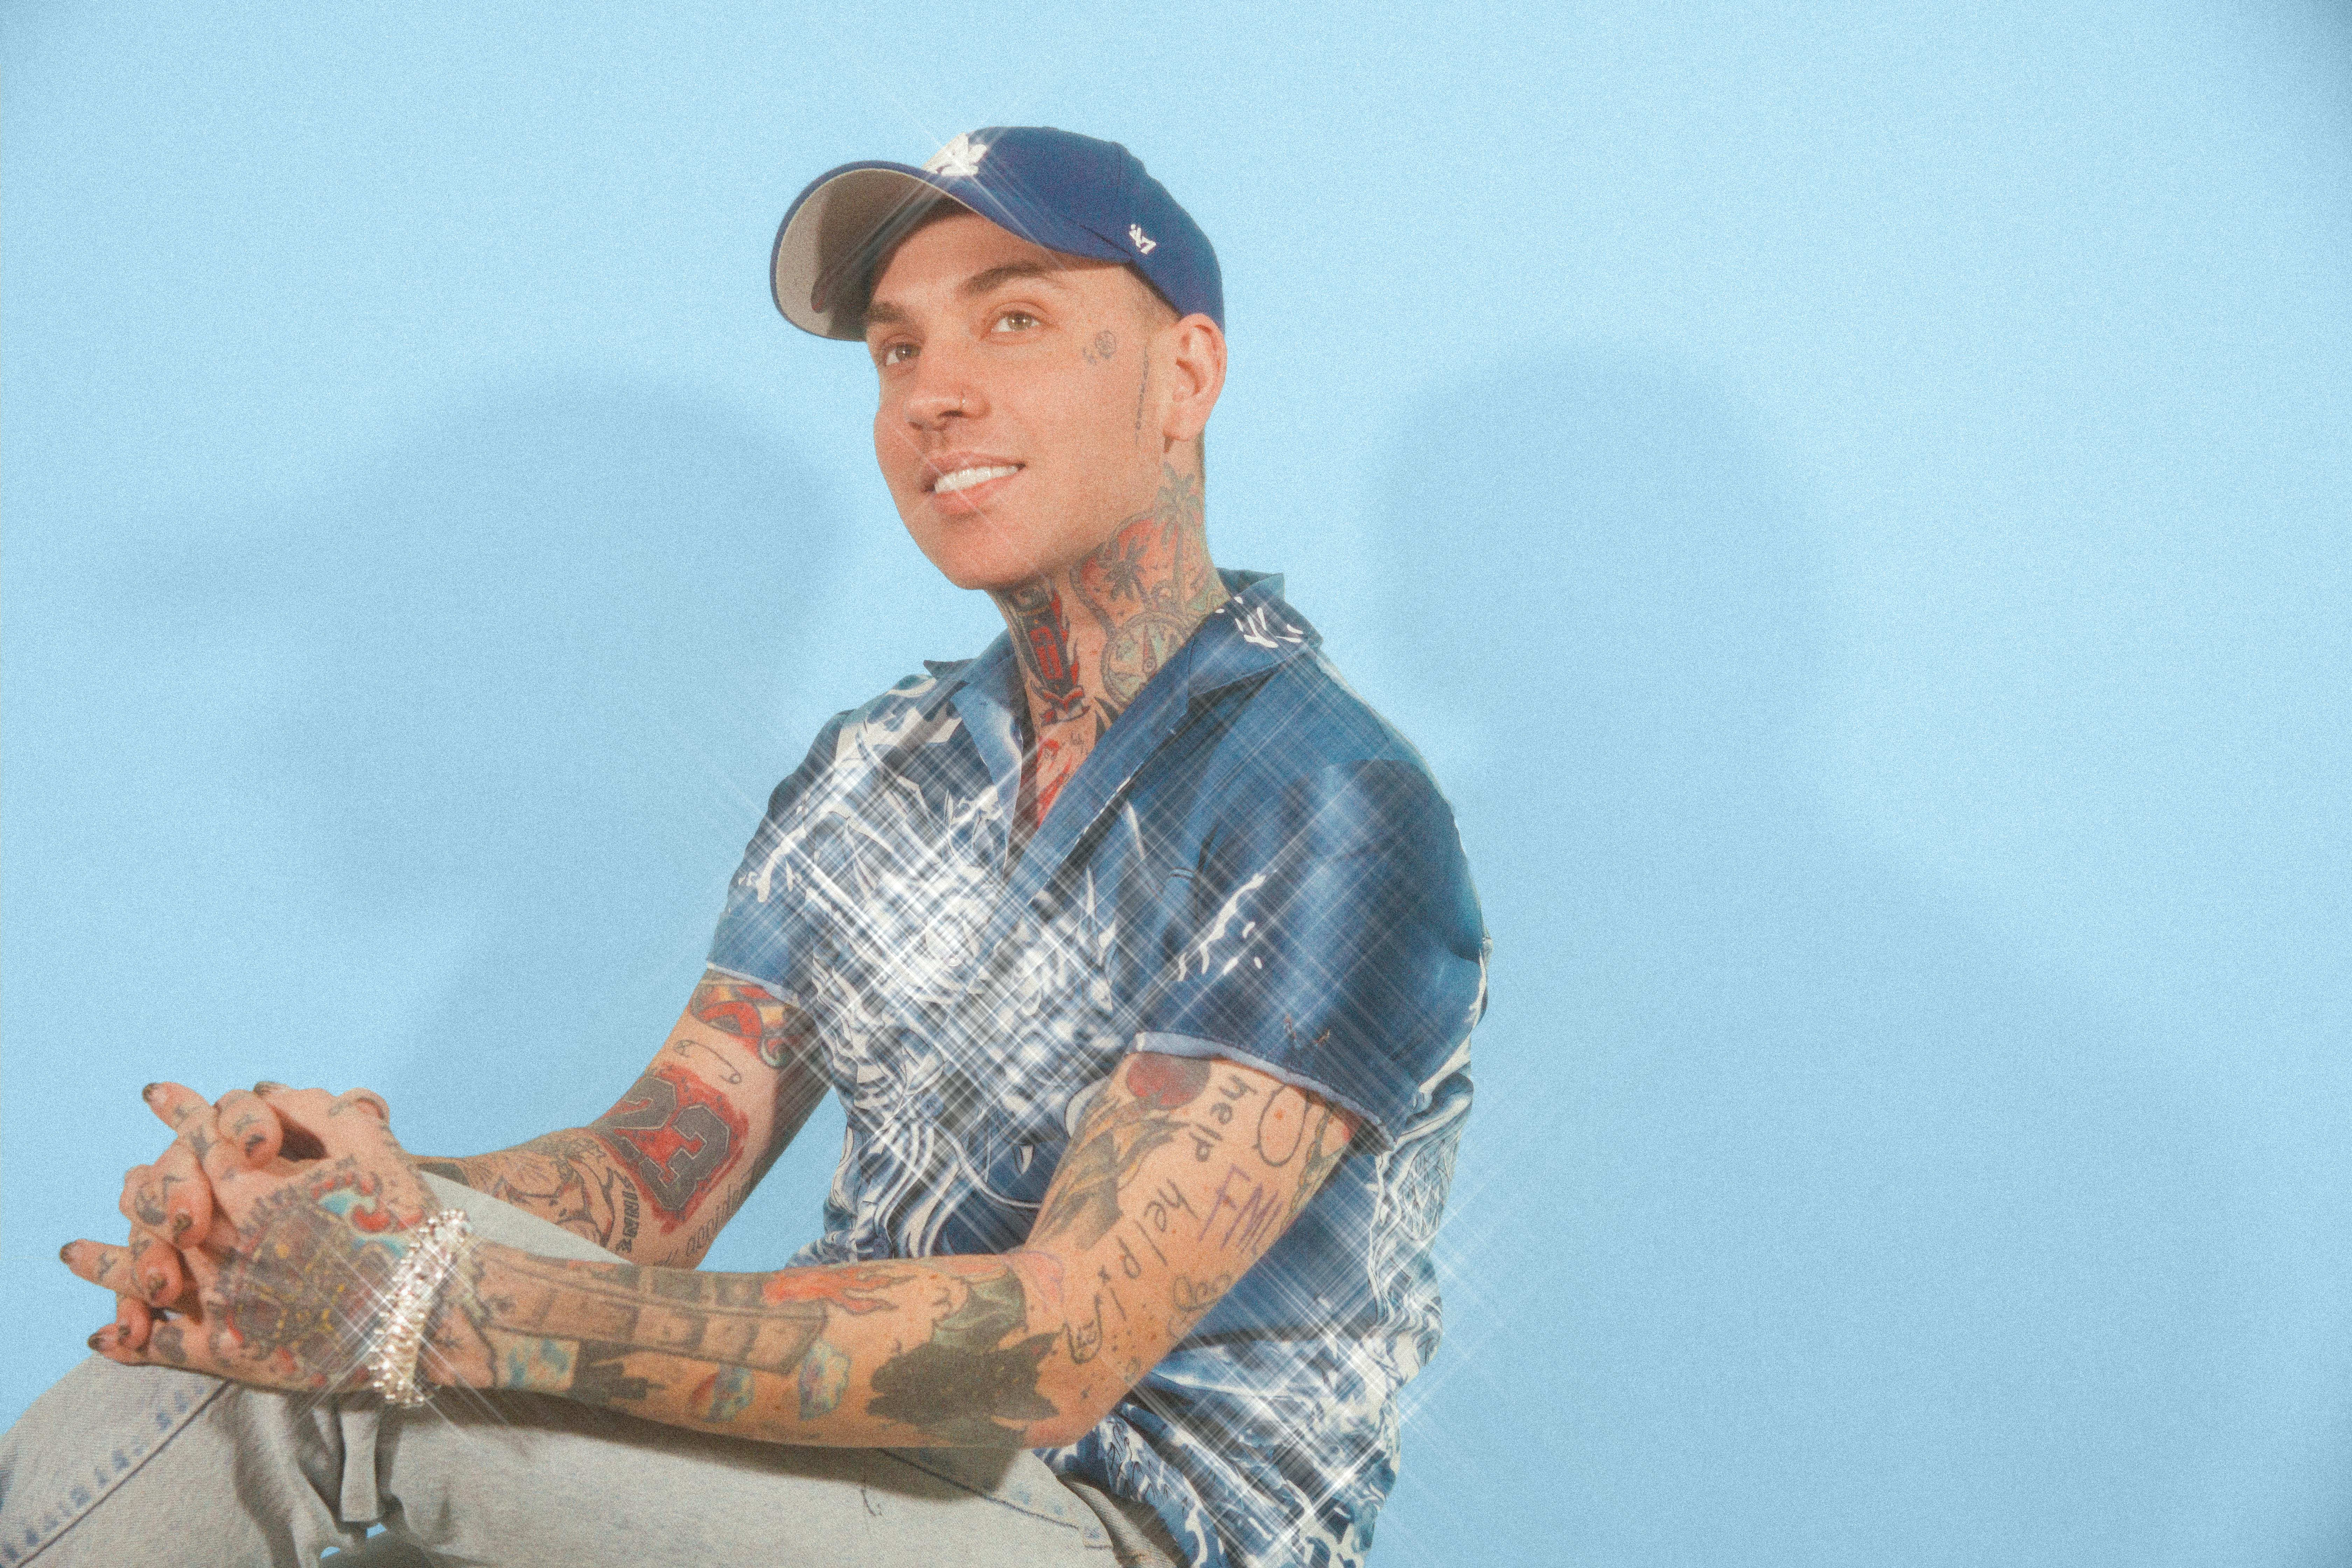 Interview With Blackbear On New Single Quot Queen Of Broken Hearts Quot Singer Music - do ri me blackbear song id roblox